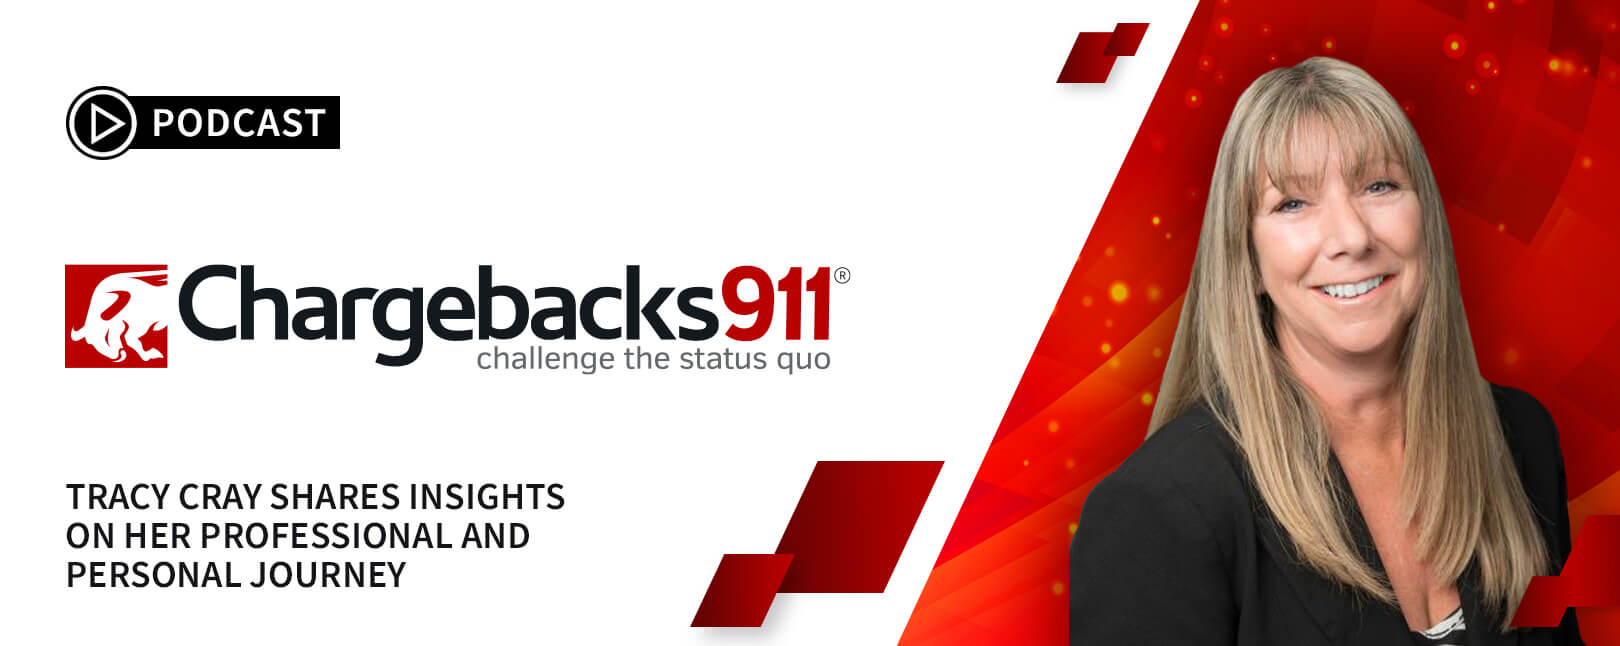 Tracy Cray of Chargebacks911® Interviewed on FinTalk Podcast